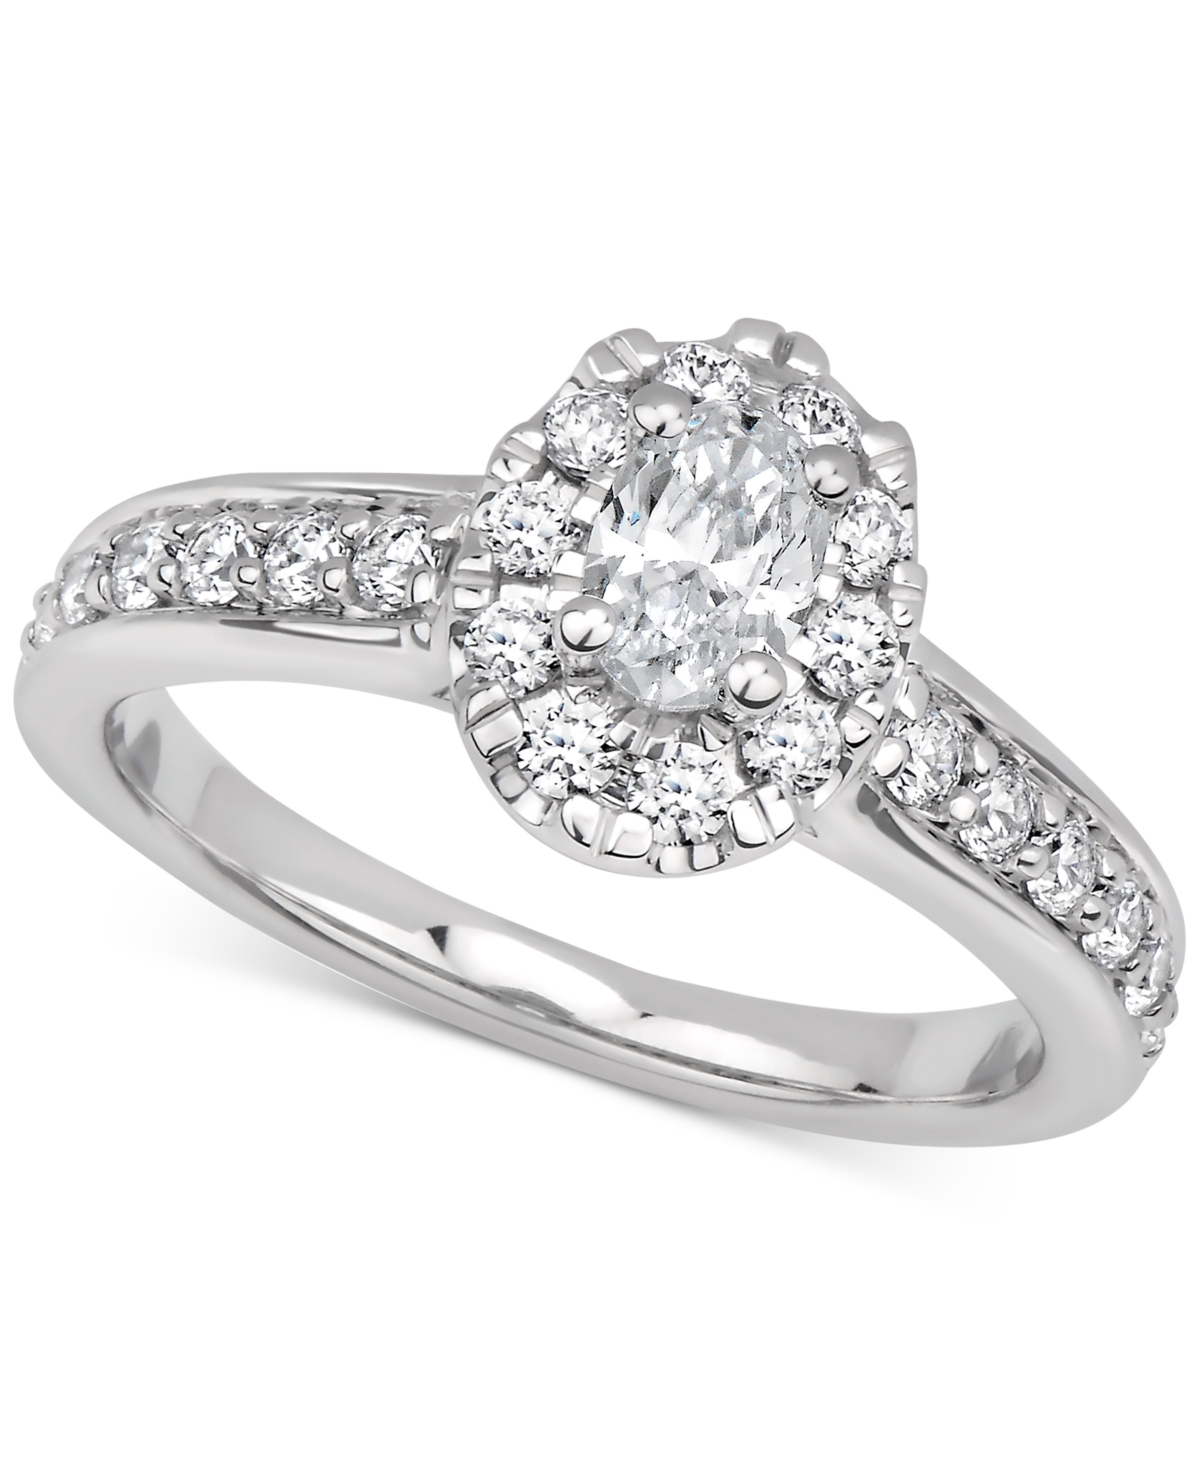 Gia Certified Diamond Oval Halo Engagement Ring (1 ct. t.w.) in 14k White Gold - White Gold